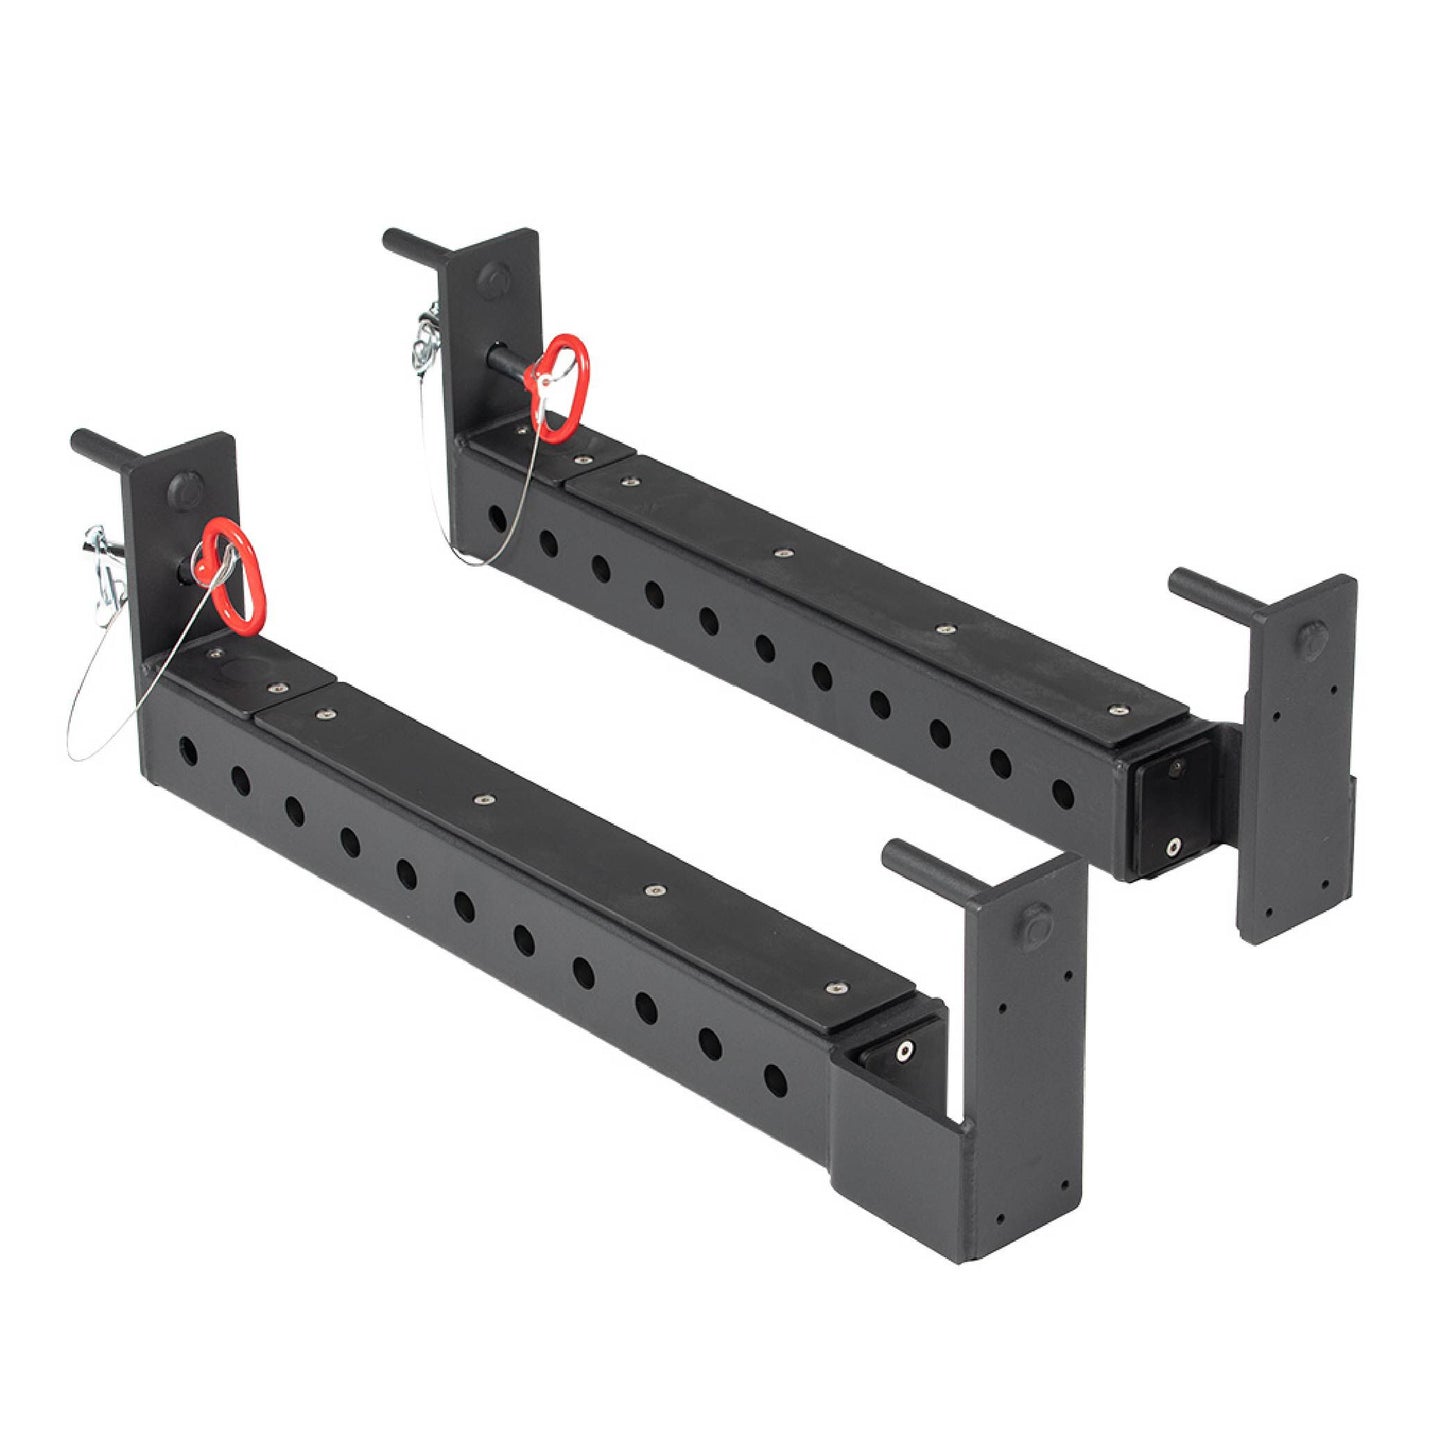 X-3 Series 24" Flip-Down Safety Bars - view 1